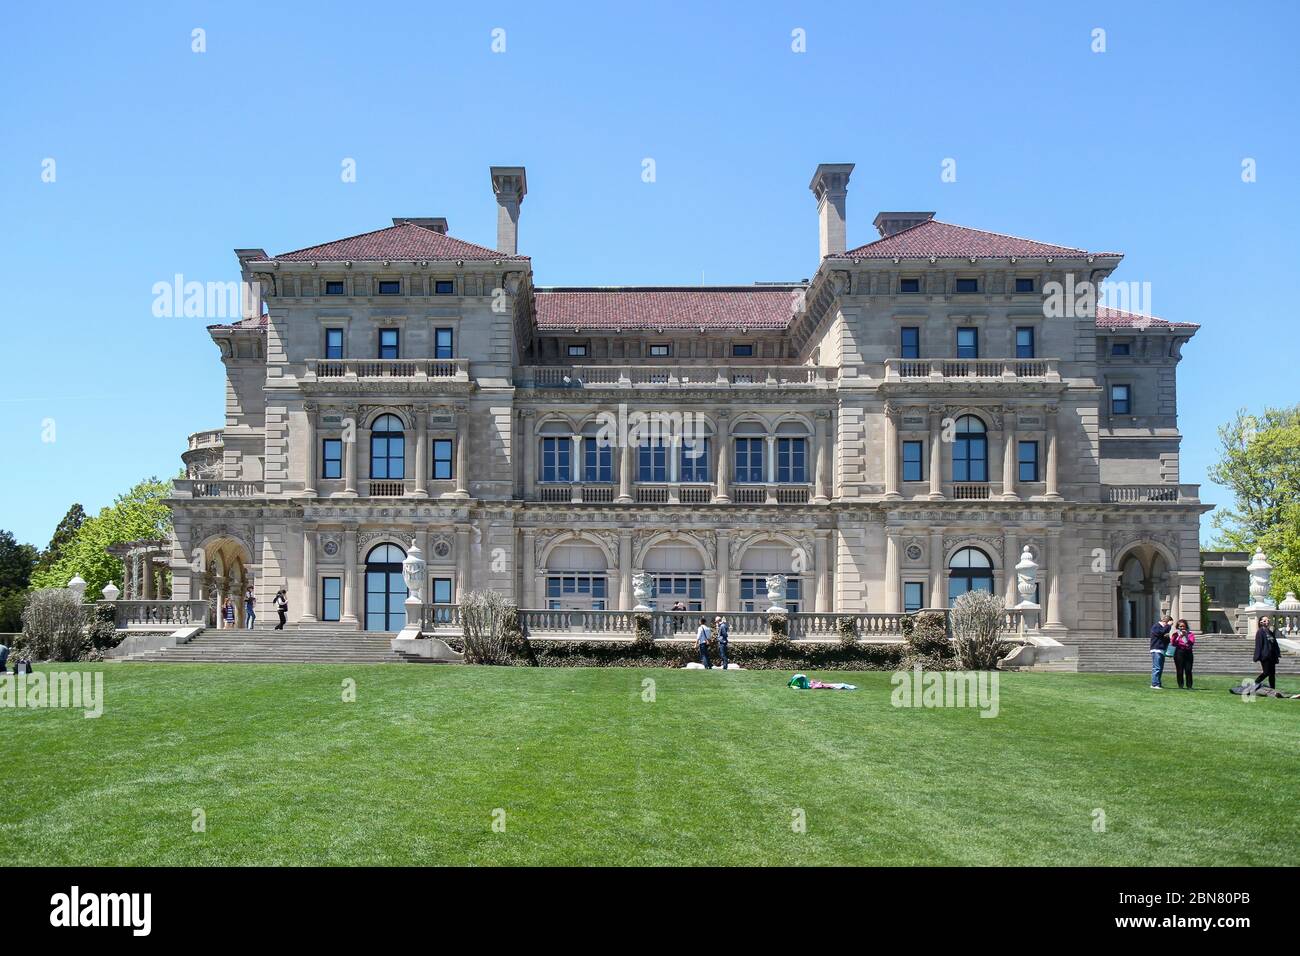 The Breakers Mansion, Newport, Rhode Island, United States Stock Photo